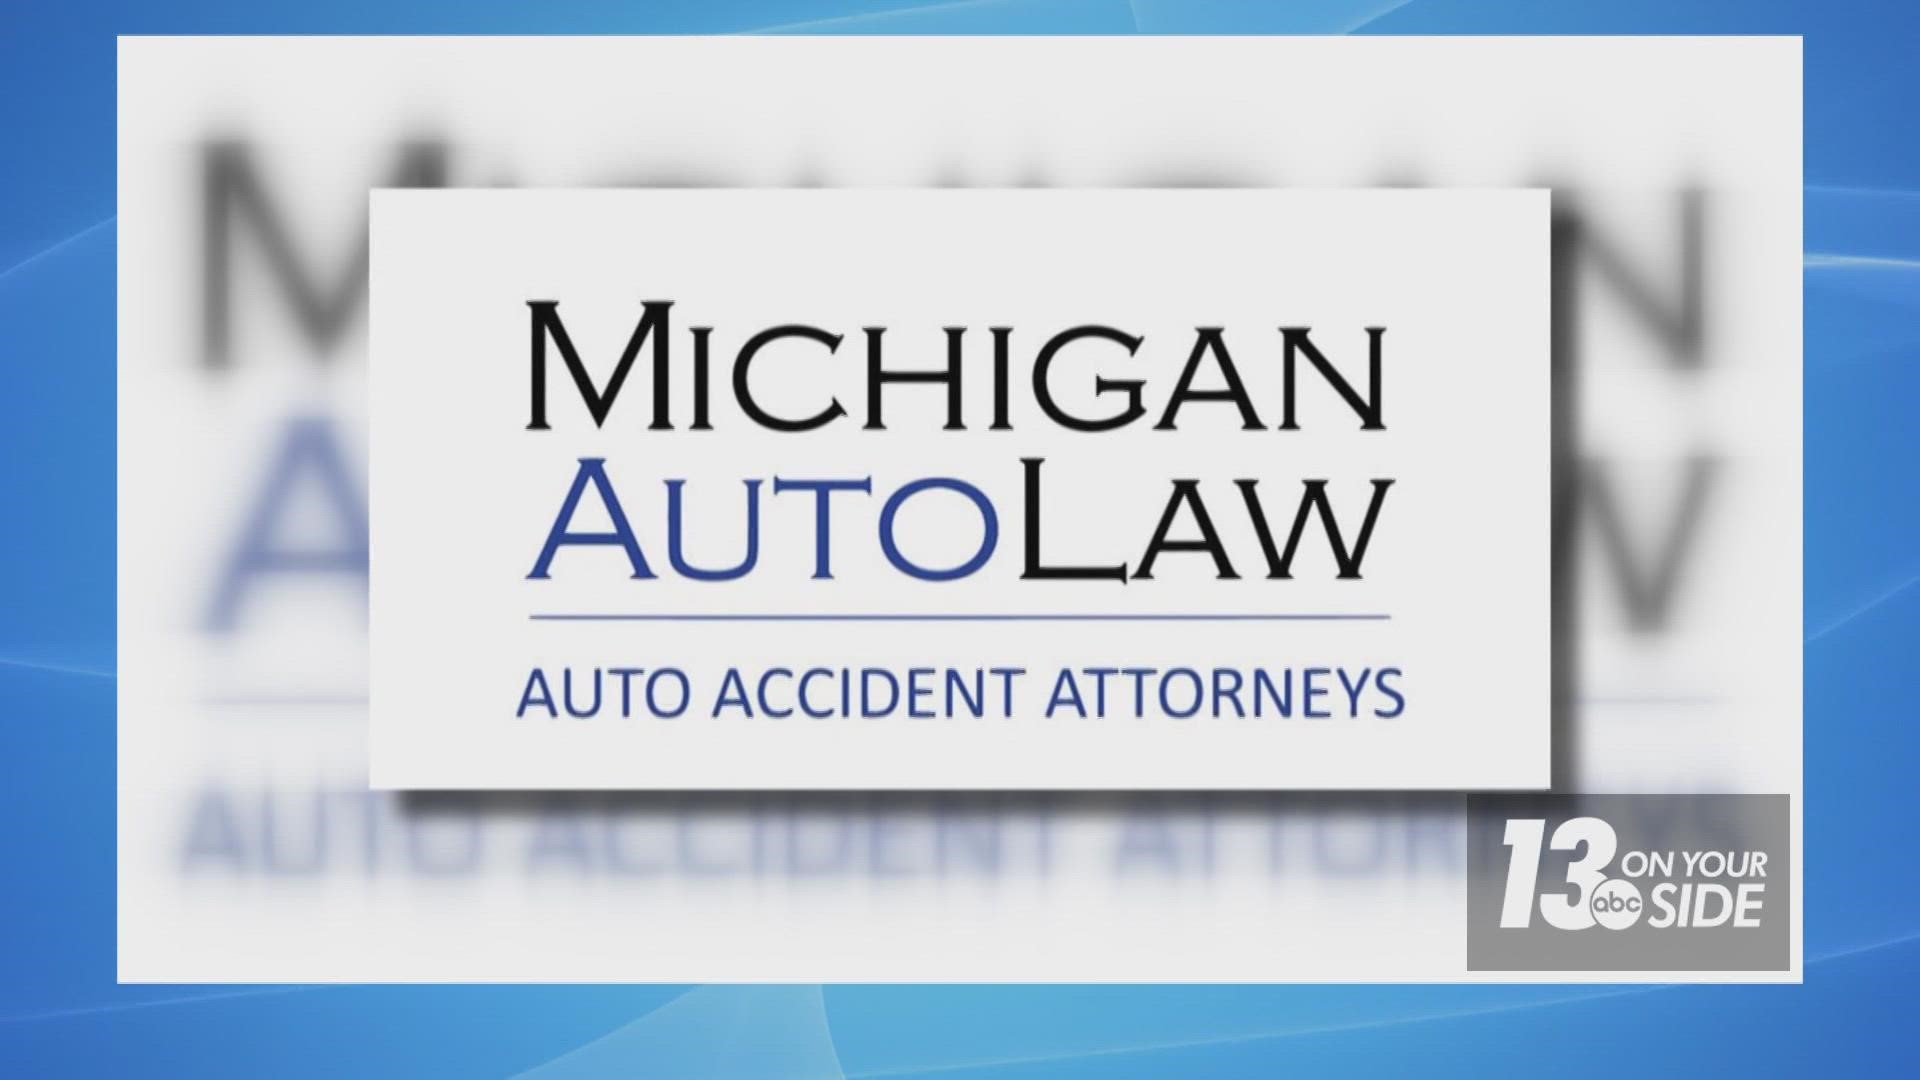 Michigan Auto Law Attorney Brandon Hewitt said there is good news and bad news about the trends when it comes to pedestrian accidents.